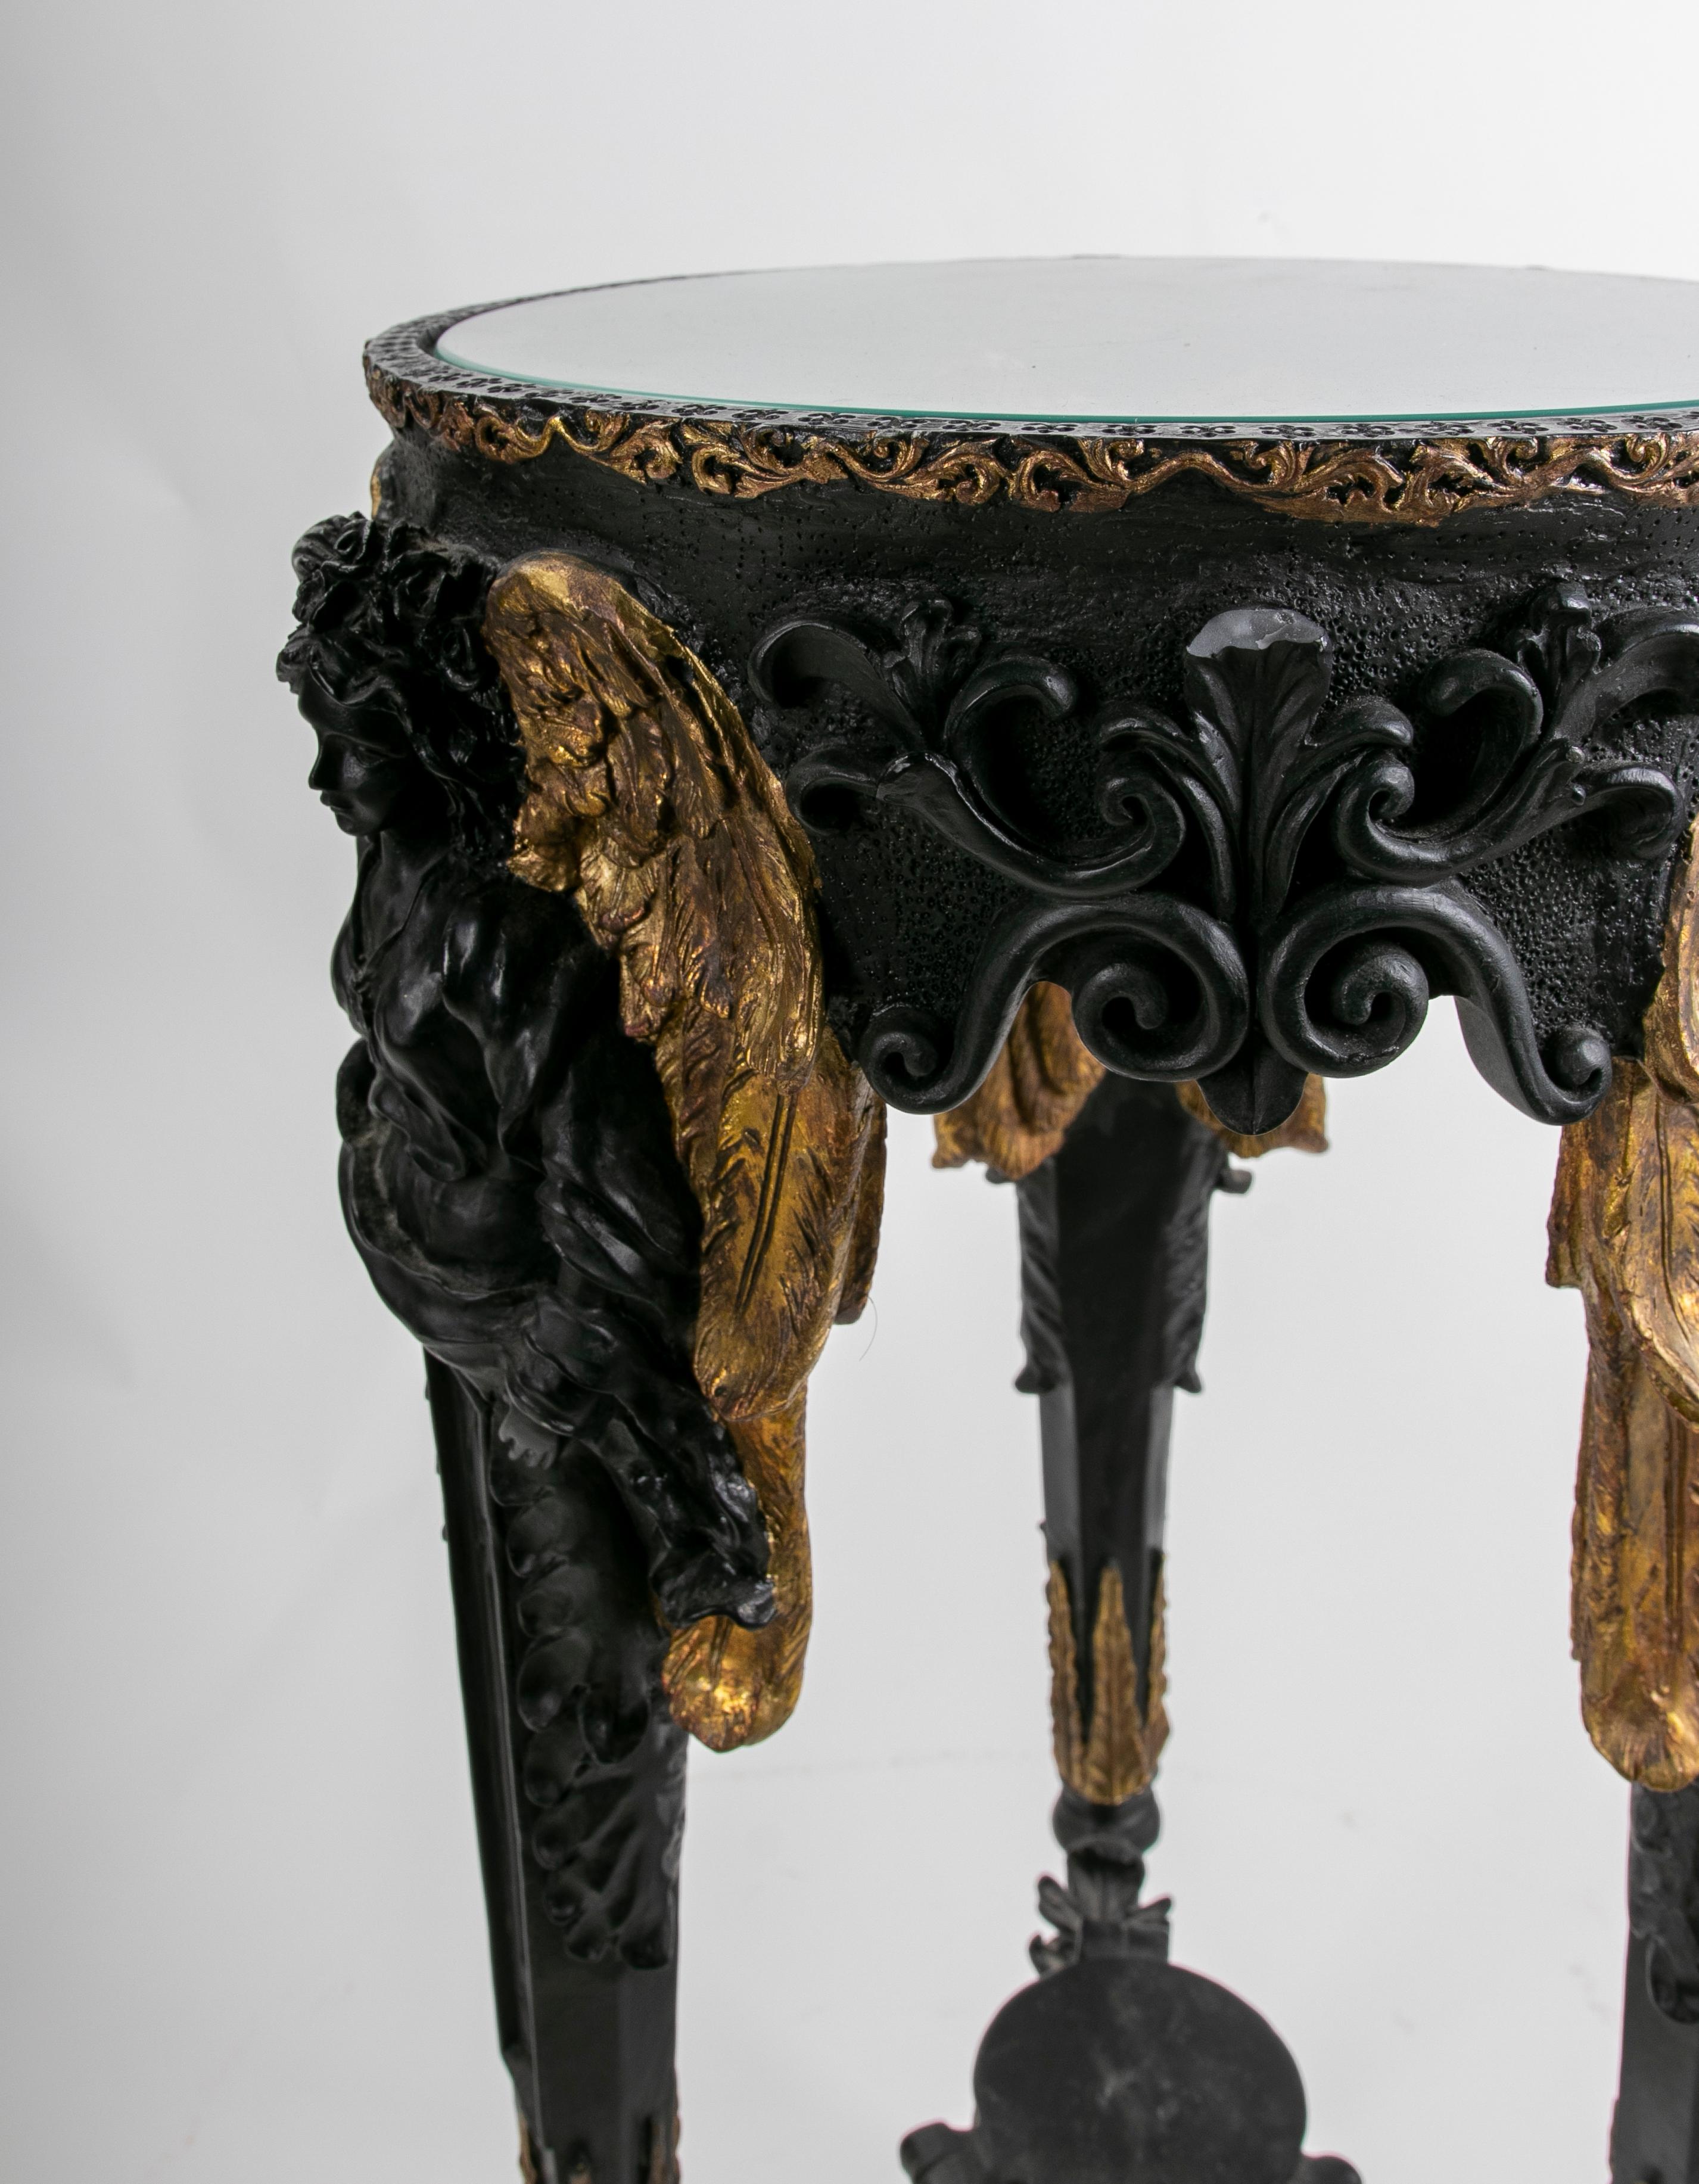 European Polychromed Bronze Side Table with Winged Women on the Legs For Sale